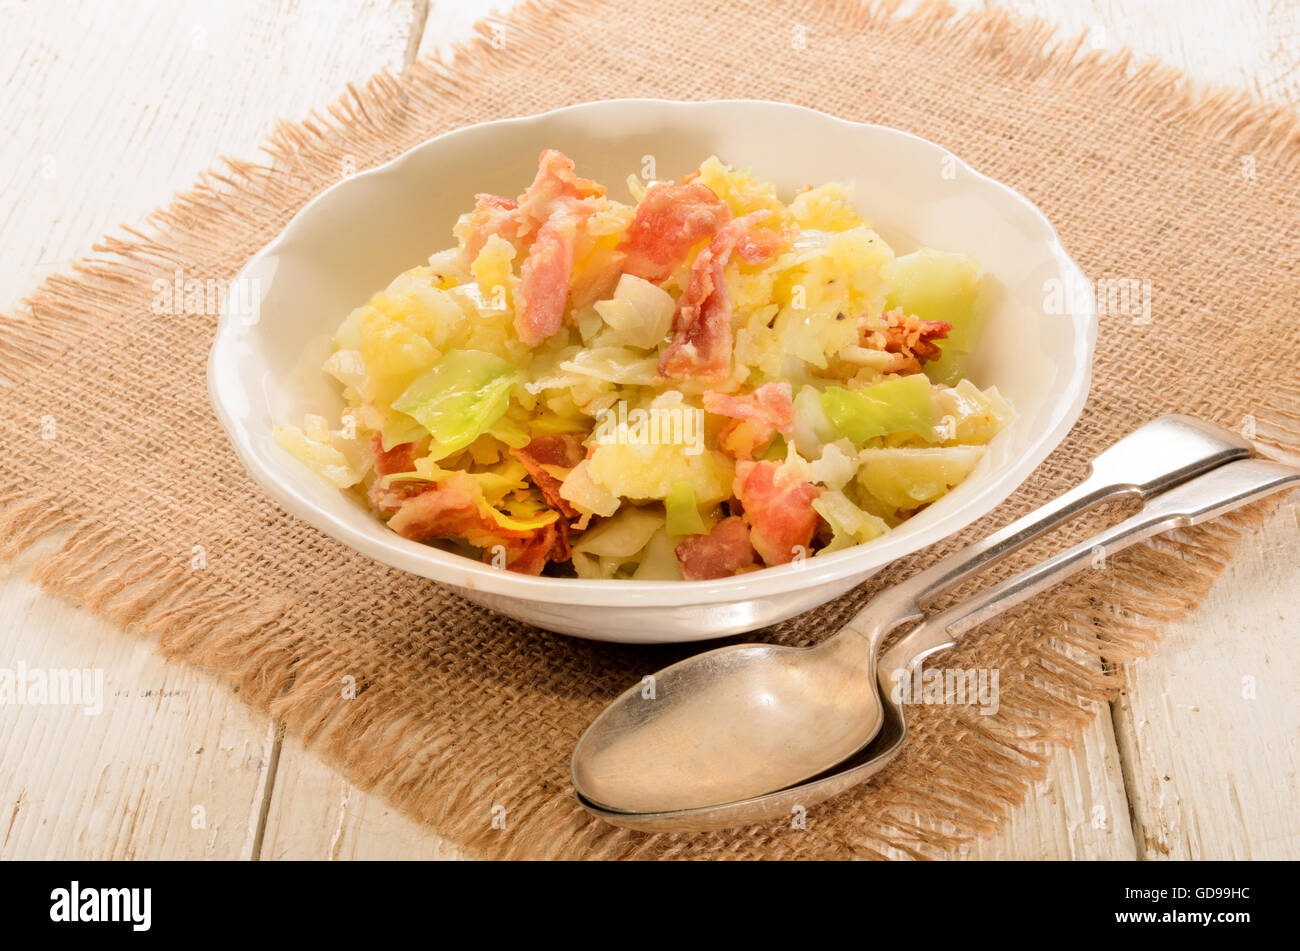 irish colcannon, made with mashed potato, cabbage, grilled bacon and crushes peppercorn in a bowl, with spoon Stock Photo